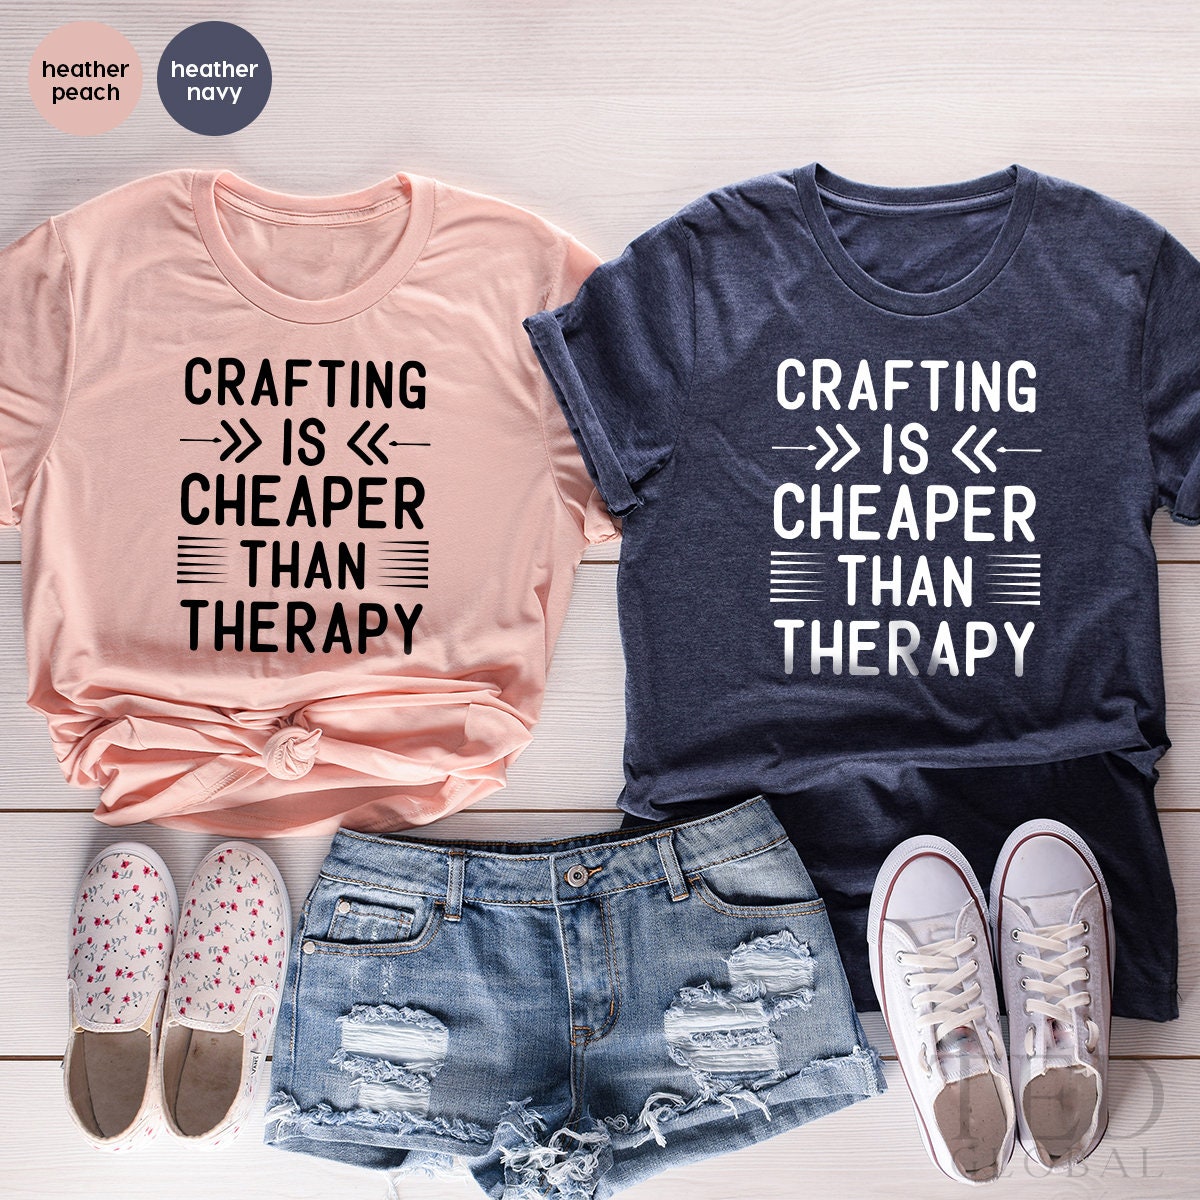 Crafting T-Shirt, Funny Craft TShirt, Cute Hobby T Shirt, Shirt For Crafter, Gift For Artist, Art Teacher Tees, Creating Graphic Tees - Fastdeliverytees.com